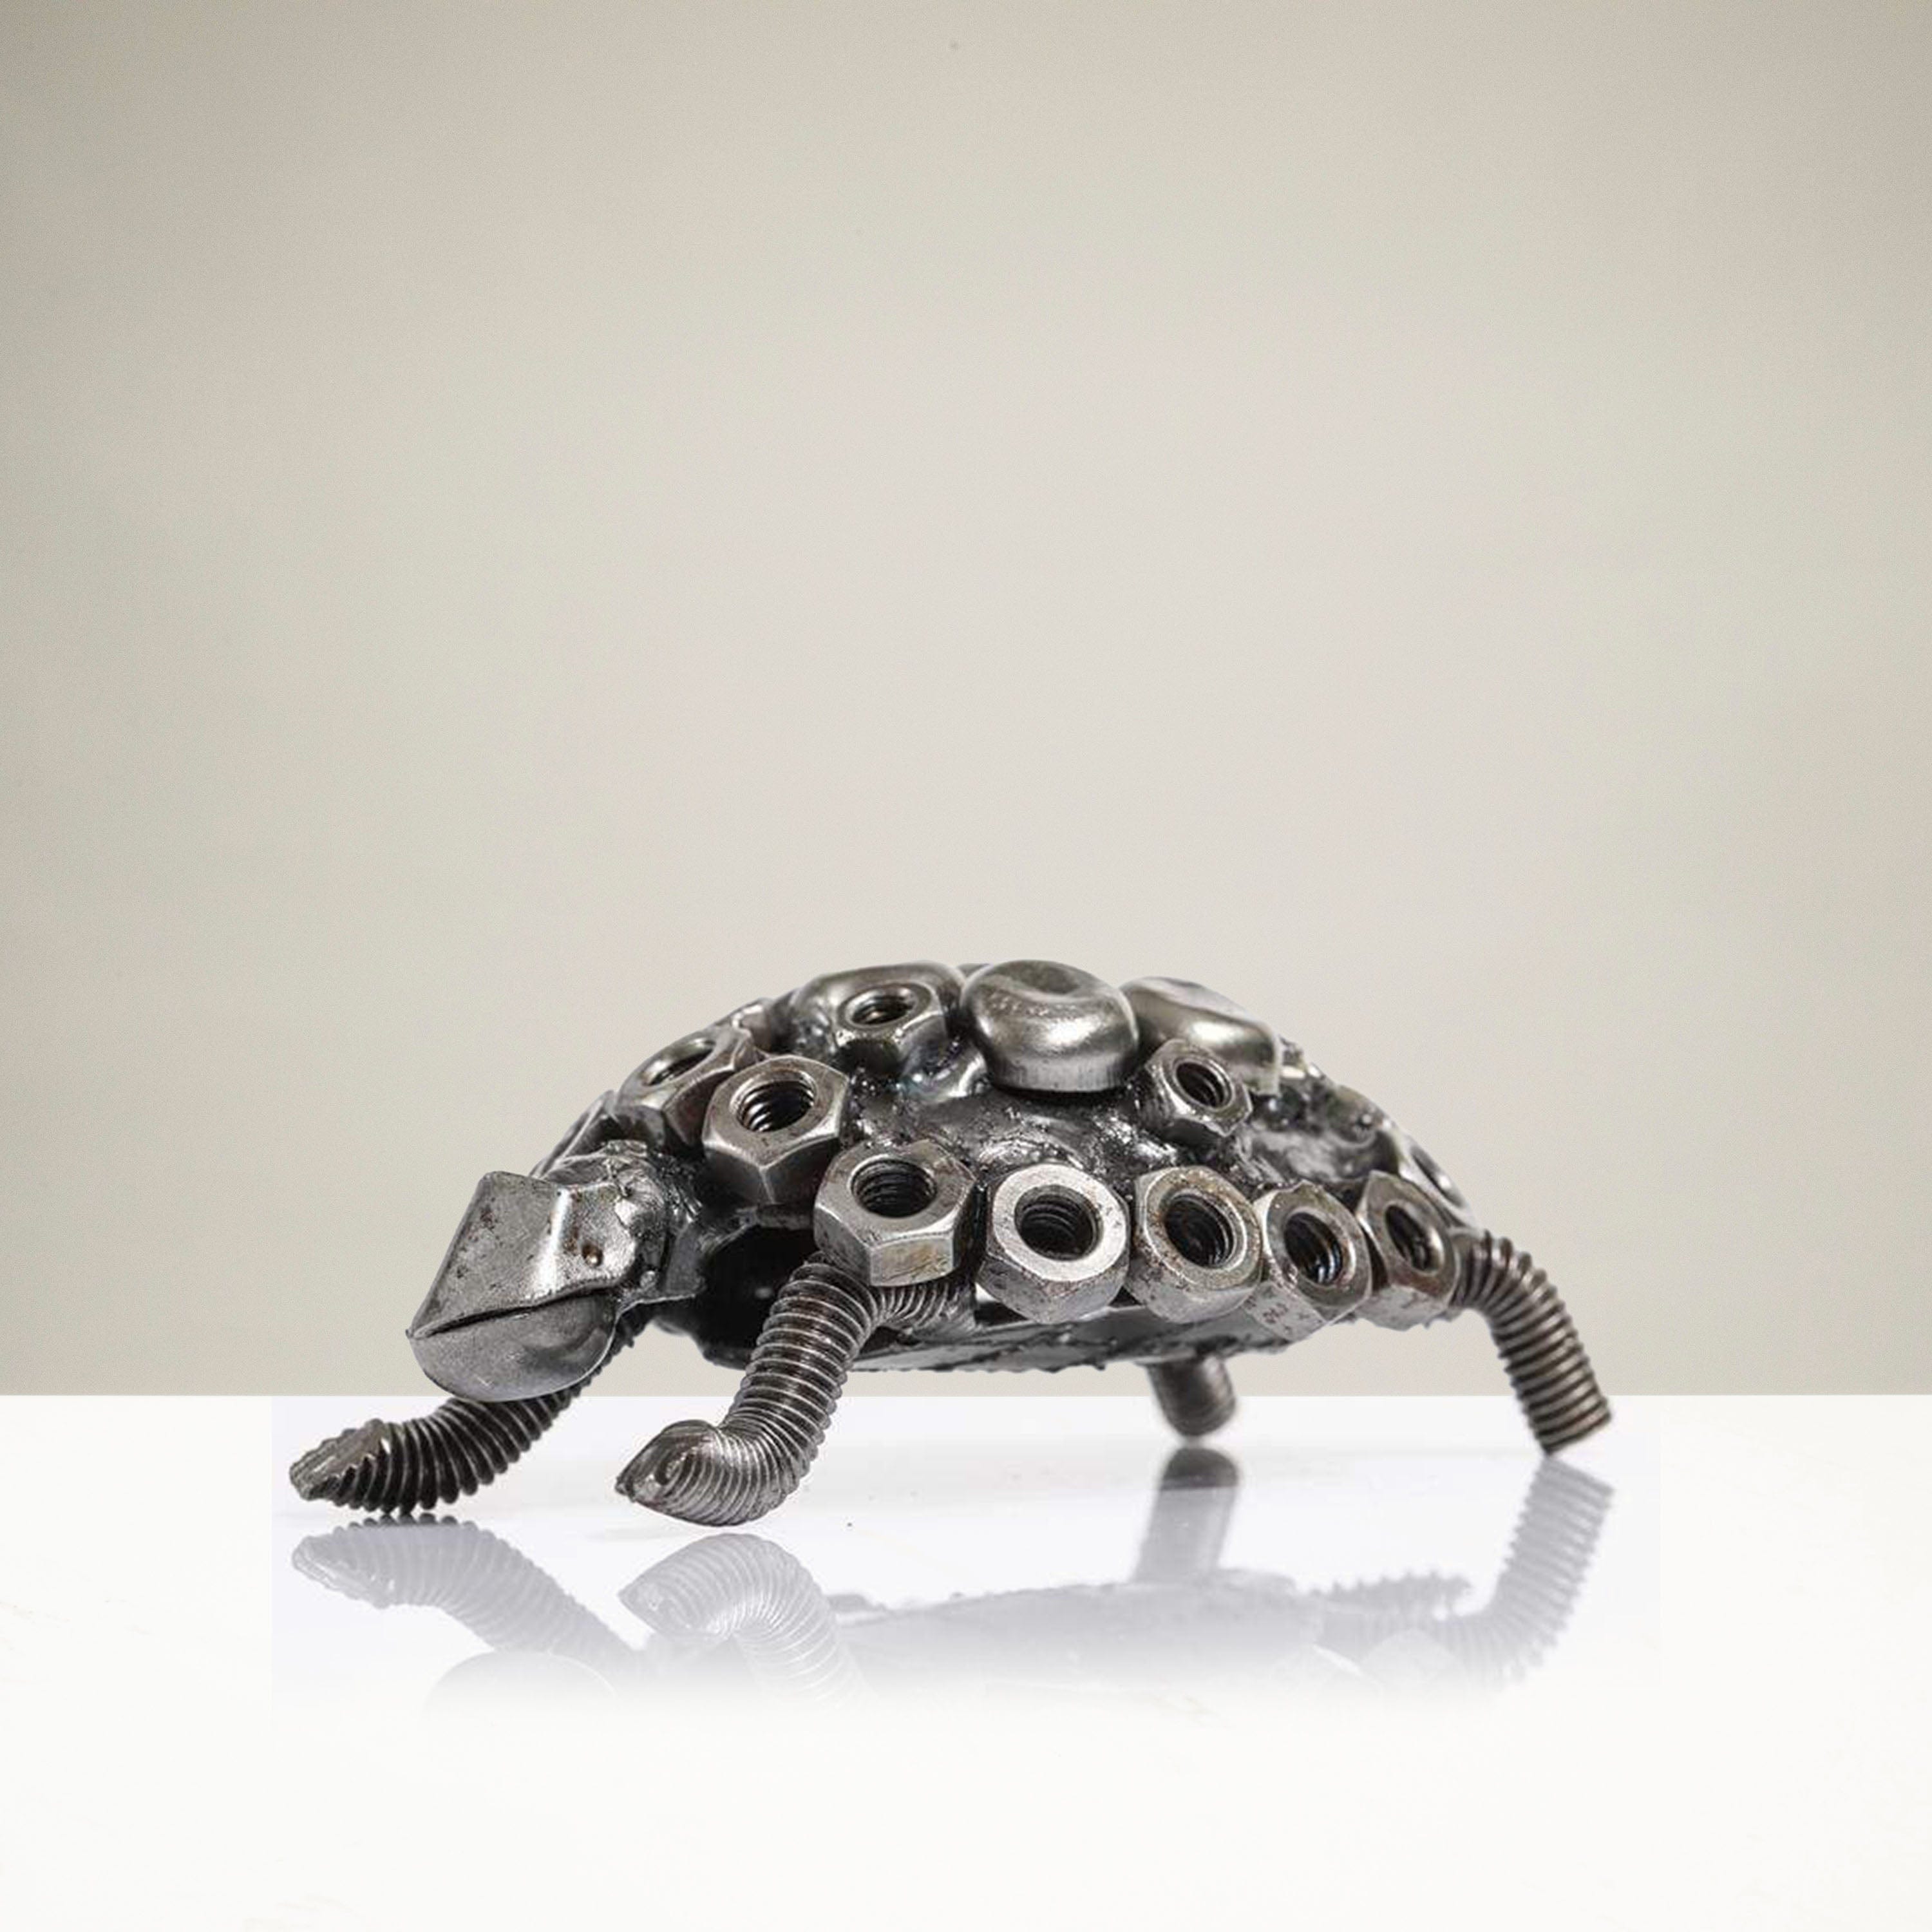 Kalifano Recycled Metal Art Turtle Recycled Metal Sculpture RMS-200T-N